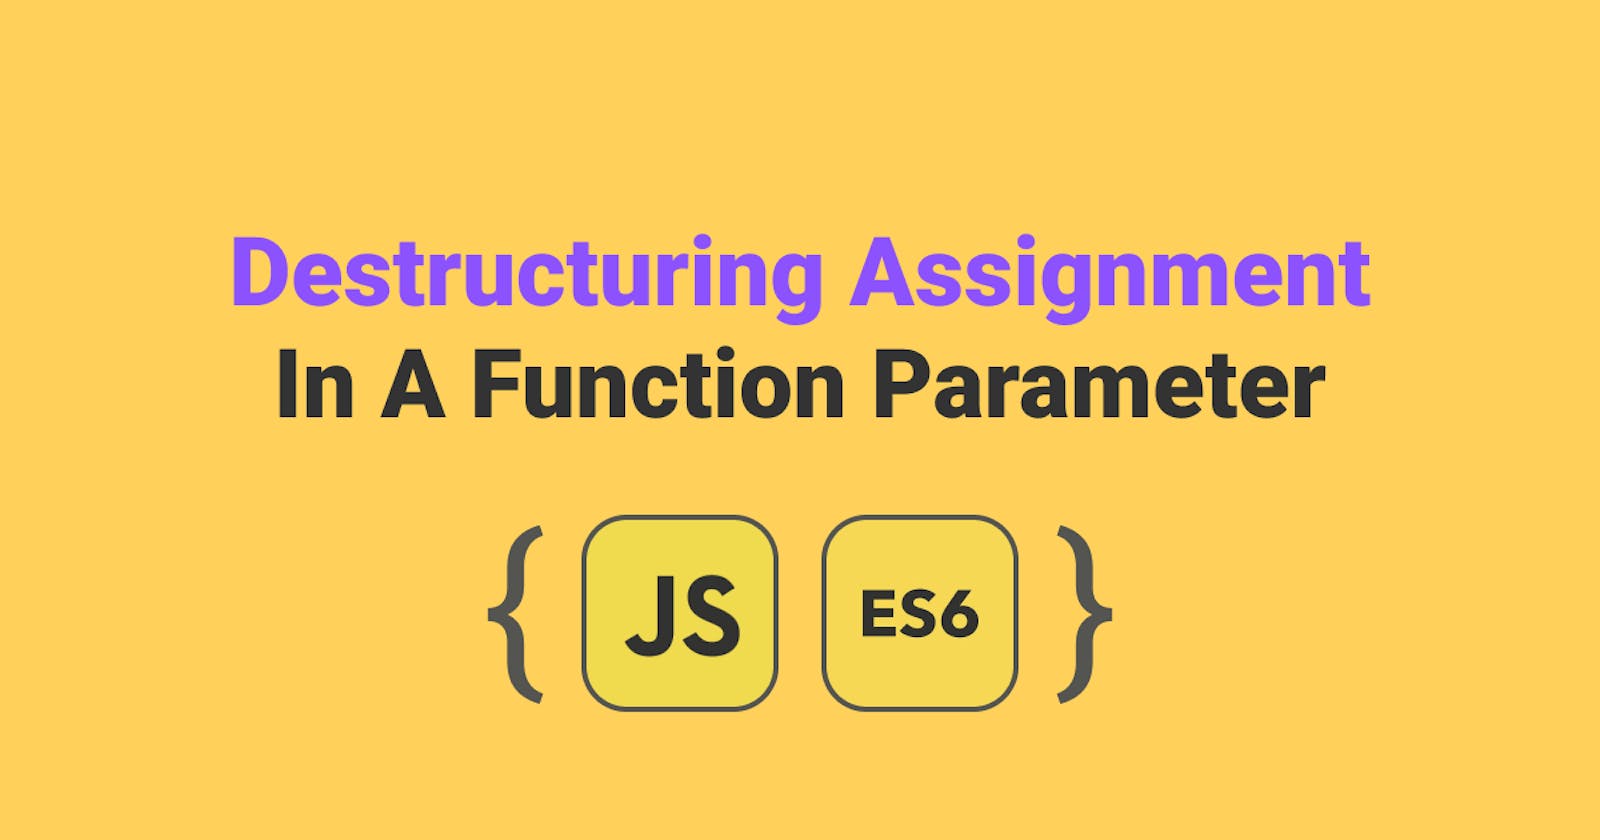 Destructuring Assignment In A Function Parameter